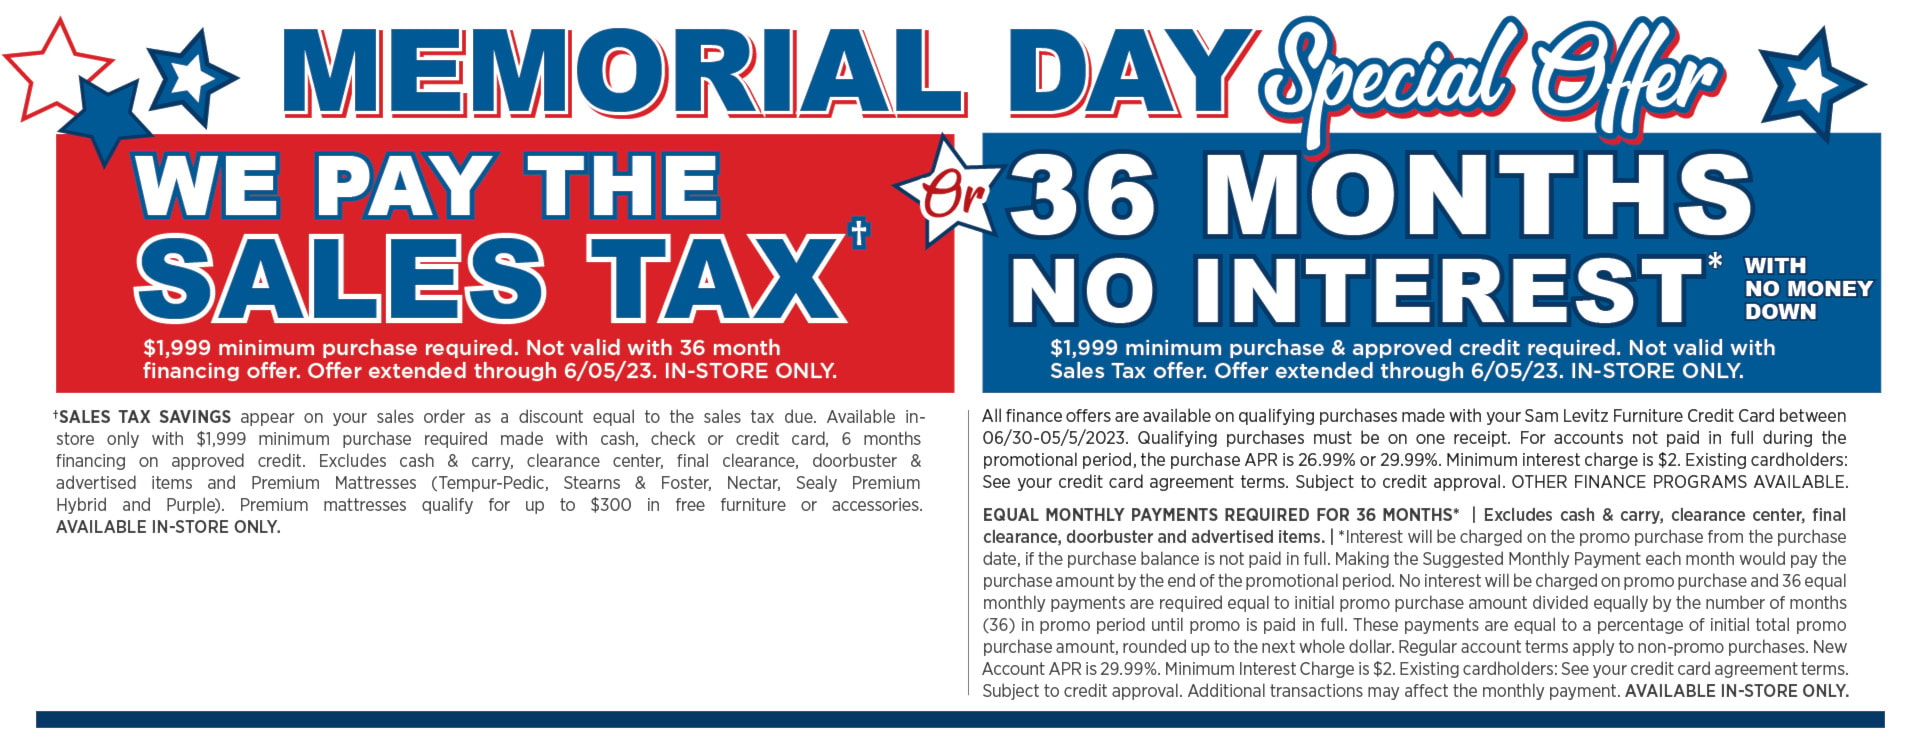 special-memorial-day-offer